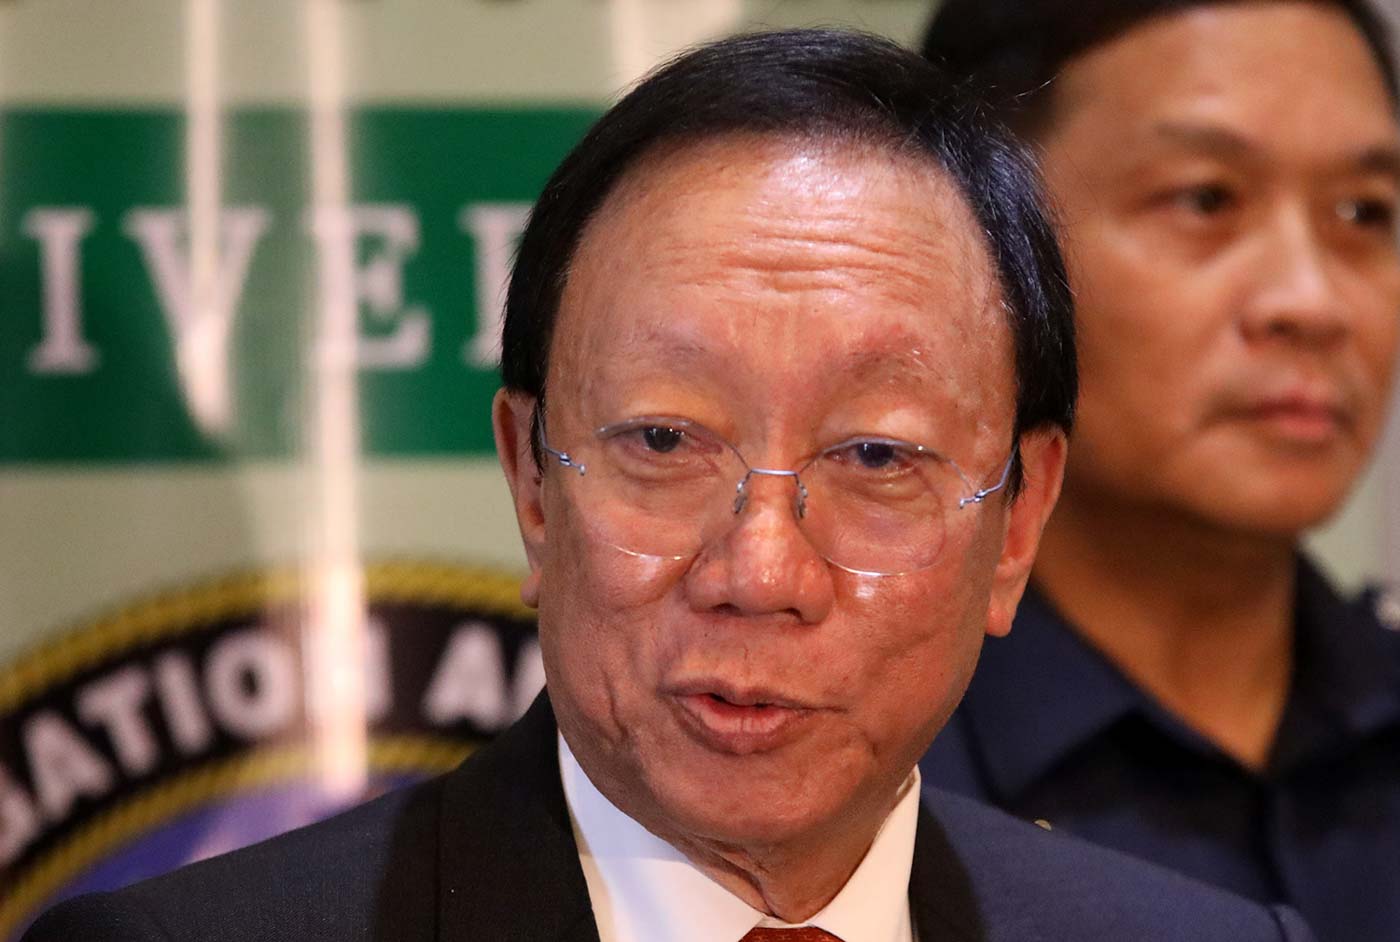 SOLGEN VS ABS-CBN. Solicitor General Jose Calida holds a press conference at Camp Crame on February 10, 2020. File photo by Darren Langit/Rappler 